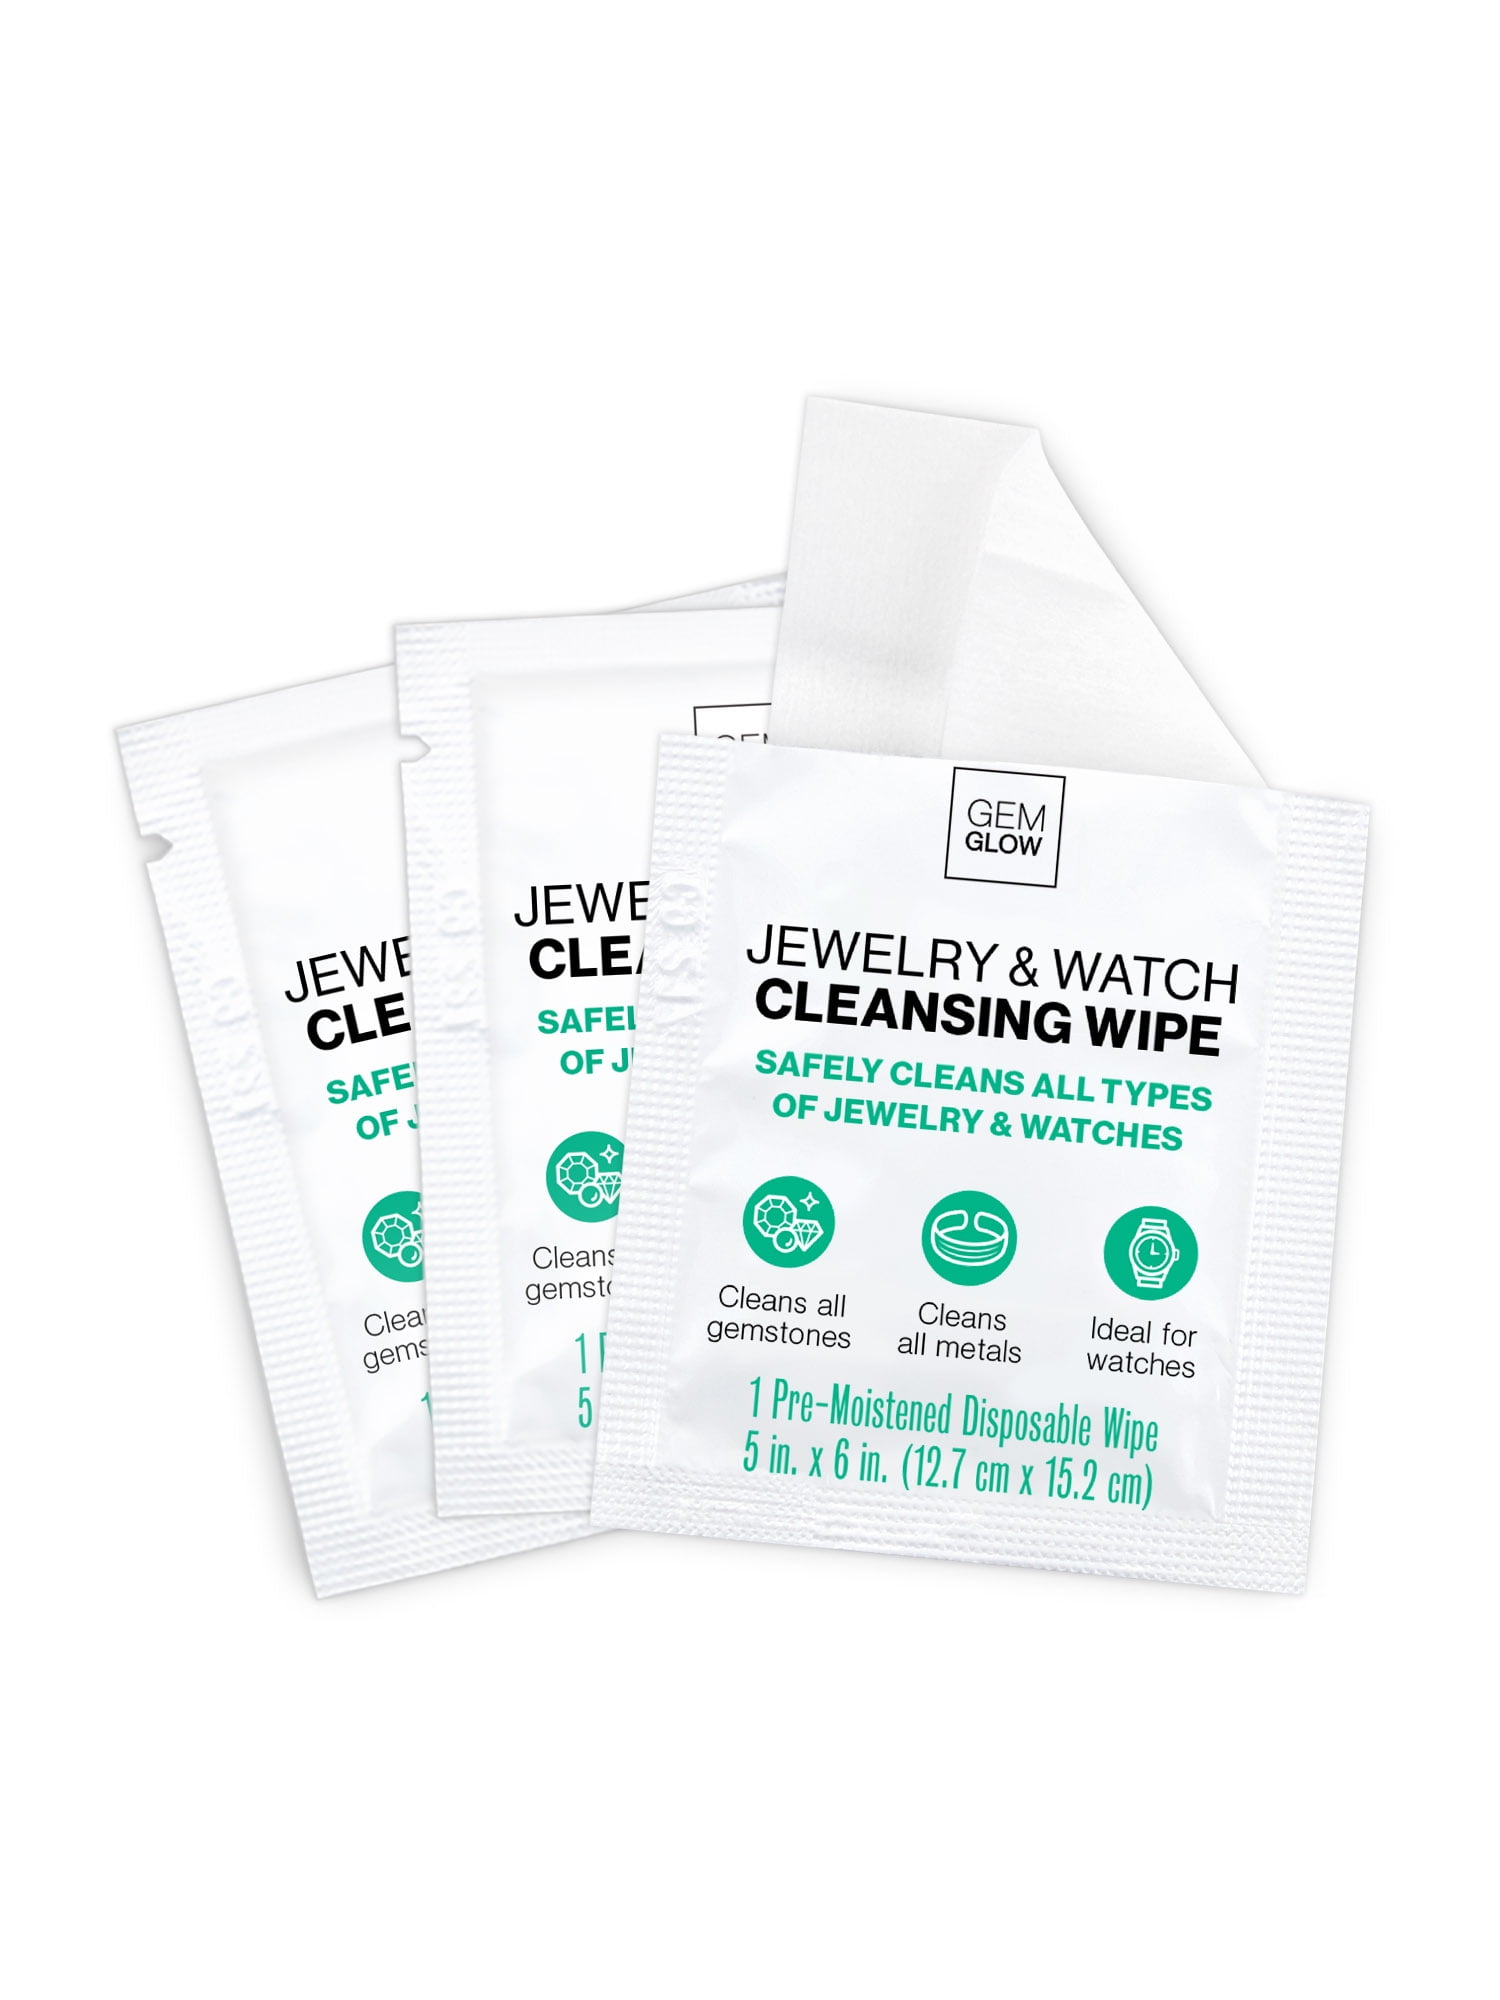 Gem Glow His & Hers Watch & Ring Cleaning Kit, Cleans All Jewelry, Rings & Watches, White